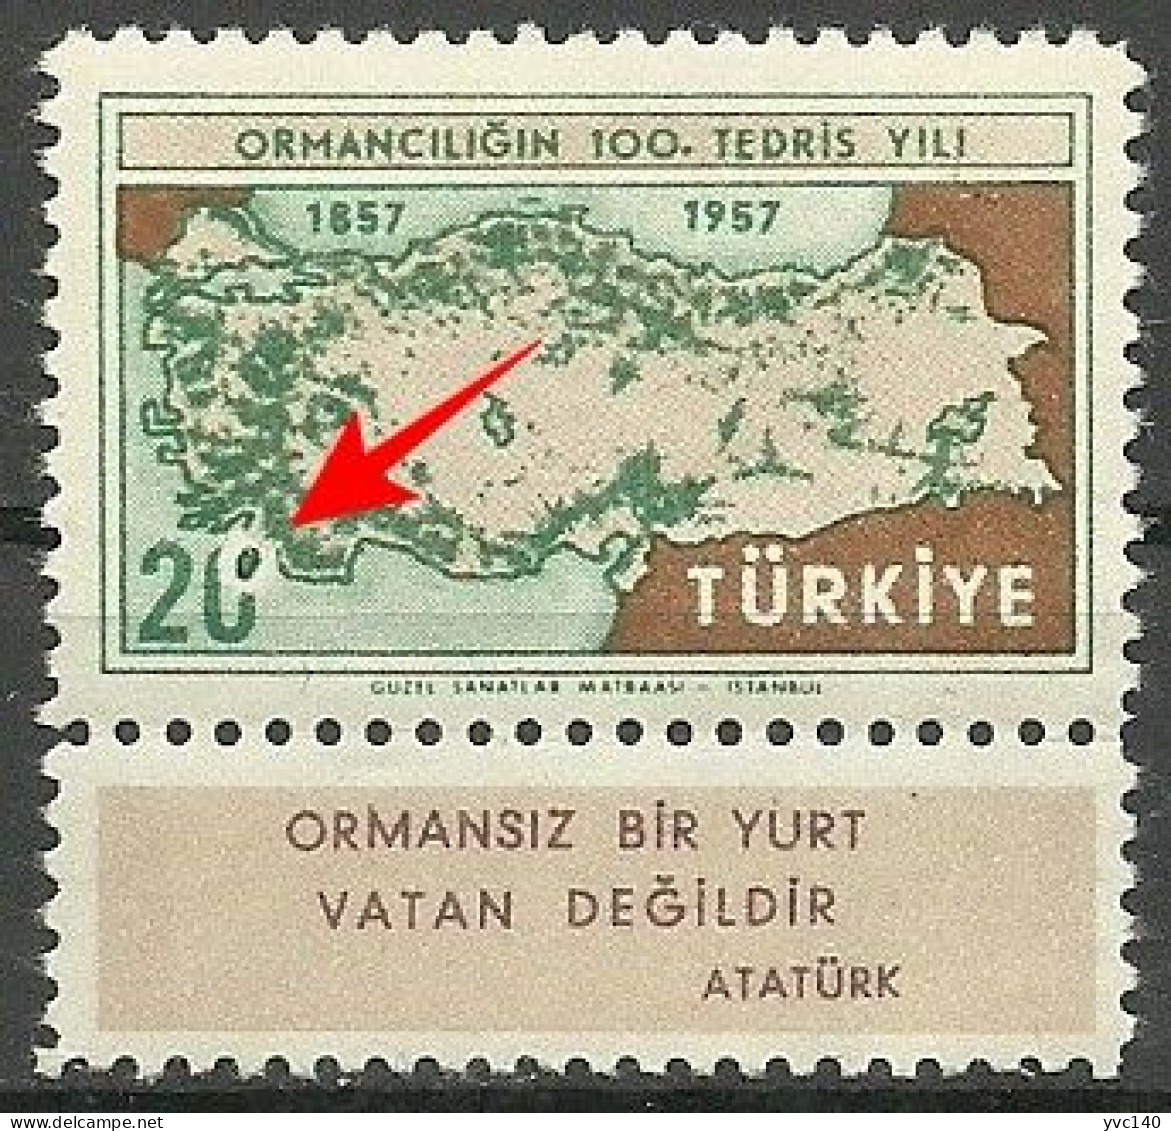 Turkey; 1957 Centenary Of The Instruction Of Forestry In Turkey ERROR "Printing Stain" - Neufs